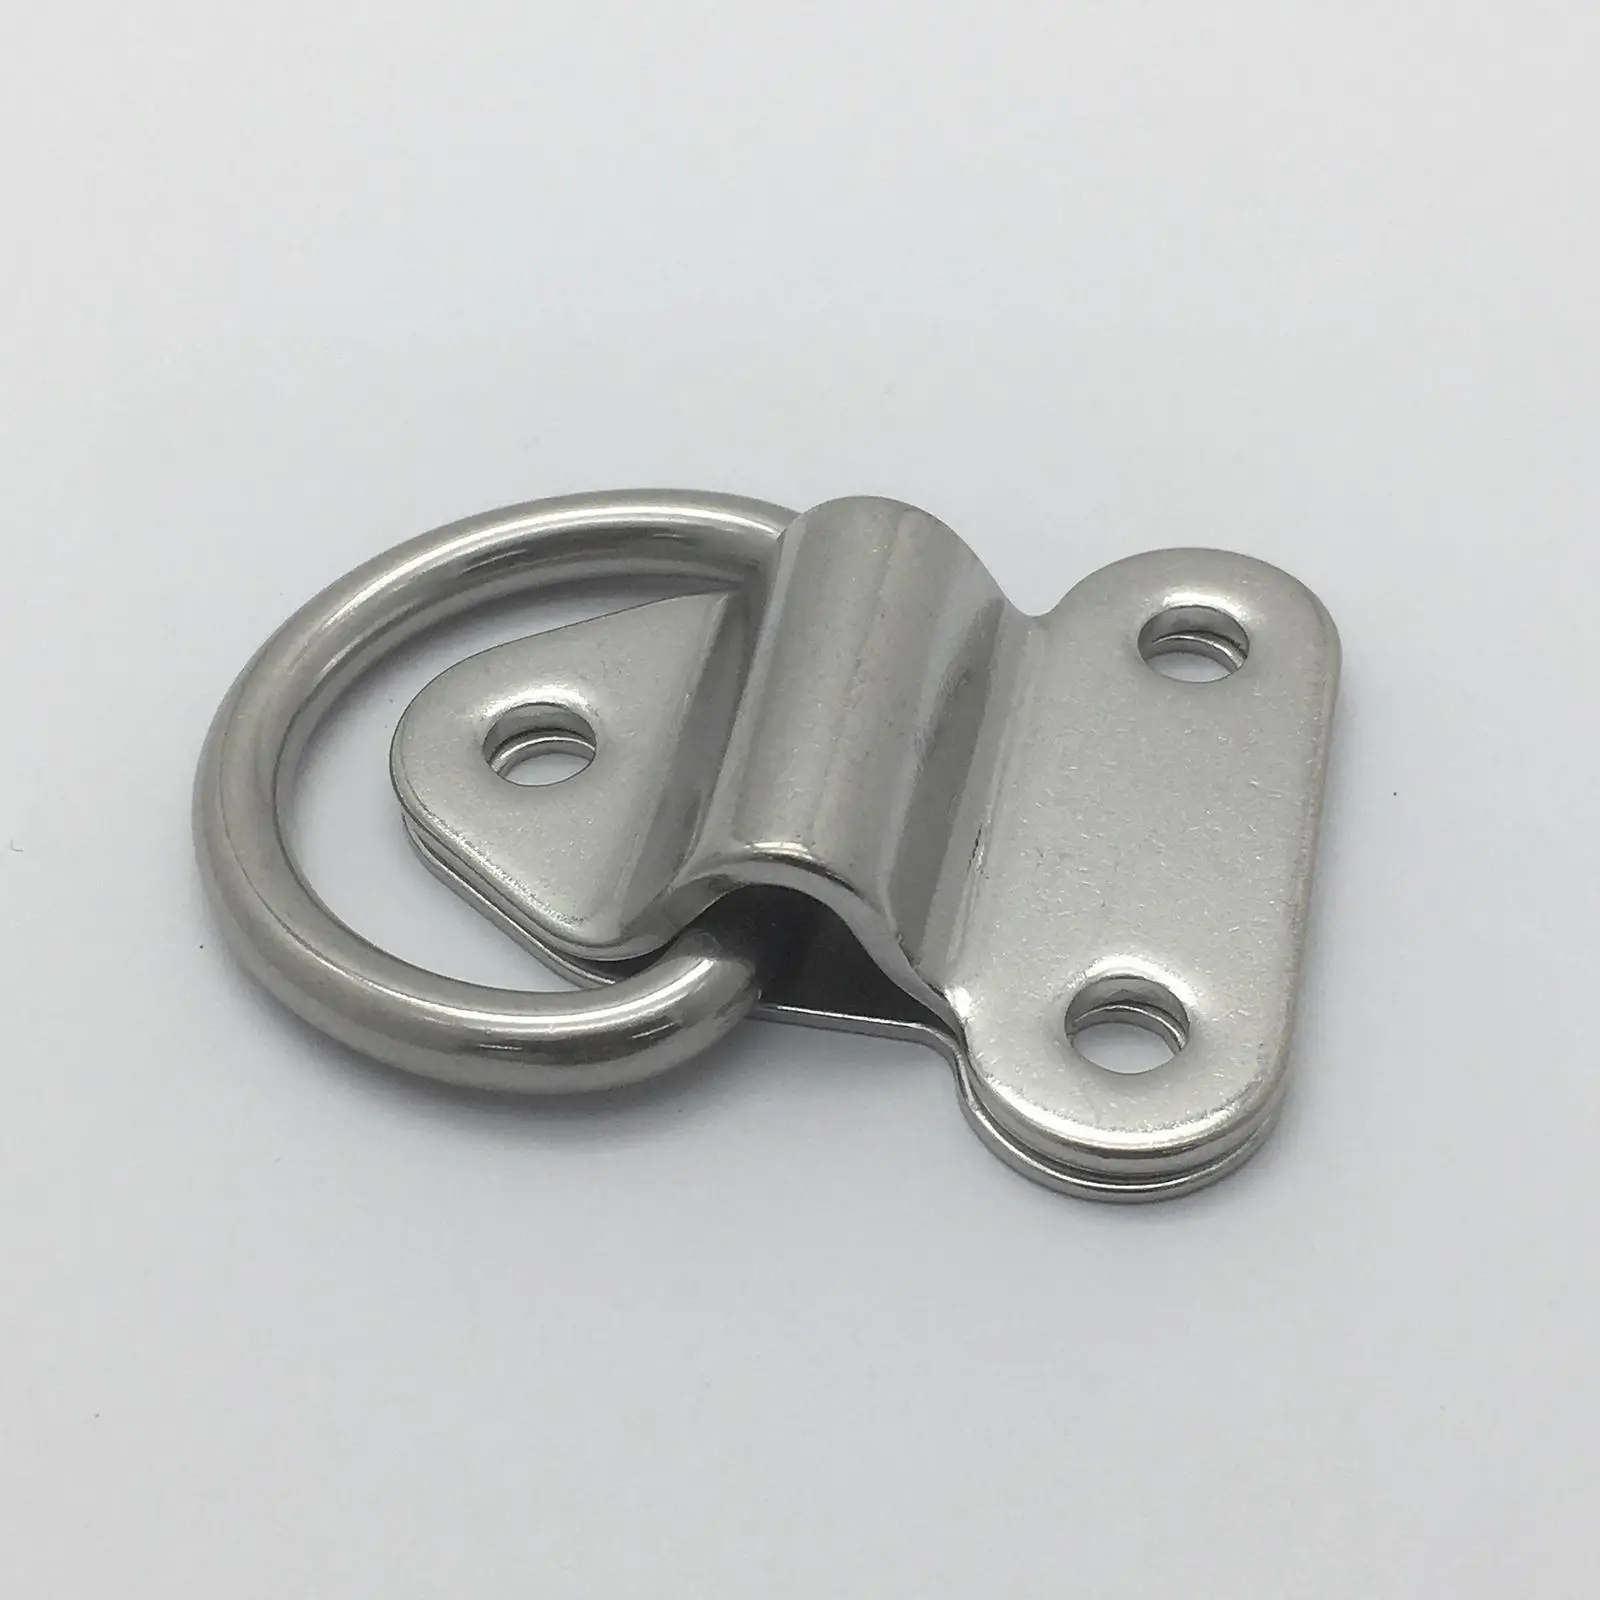 Folding Deck Pad Eyes Lashing D Ring Fastening Anchor Binding Ring Tie Down Point Anchor Pull Ring for Ship Yacht Boats